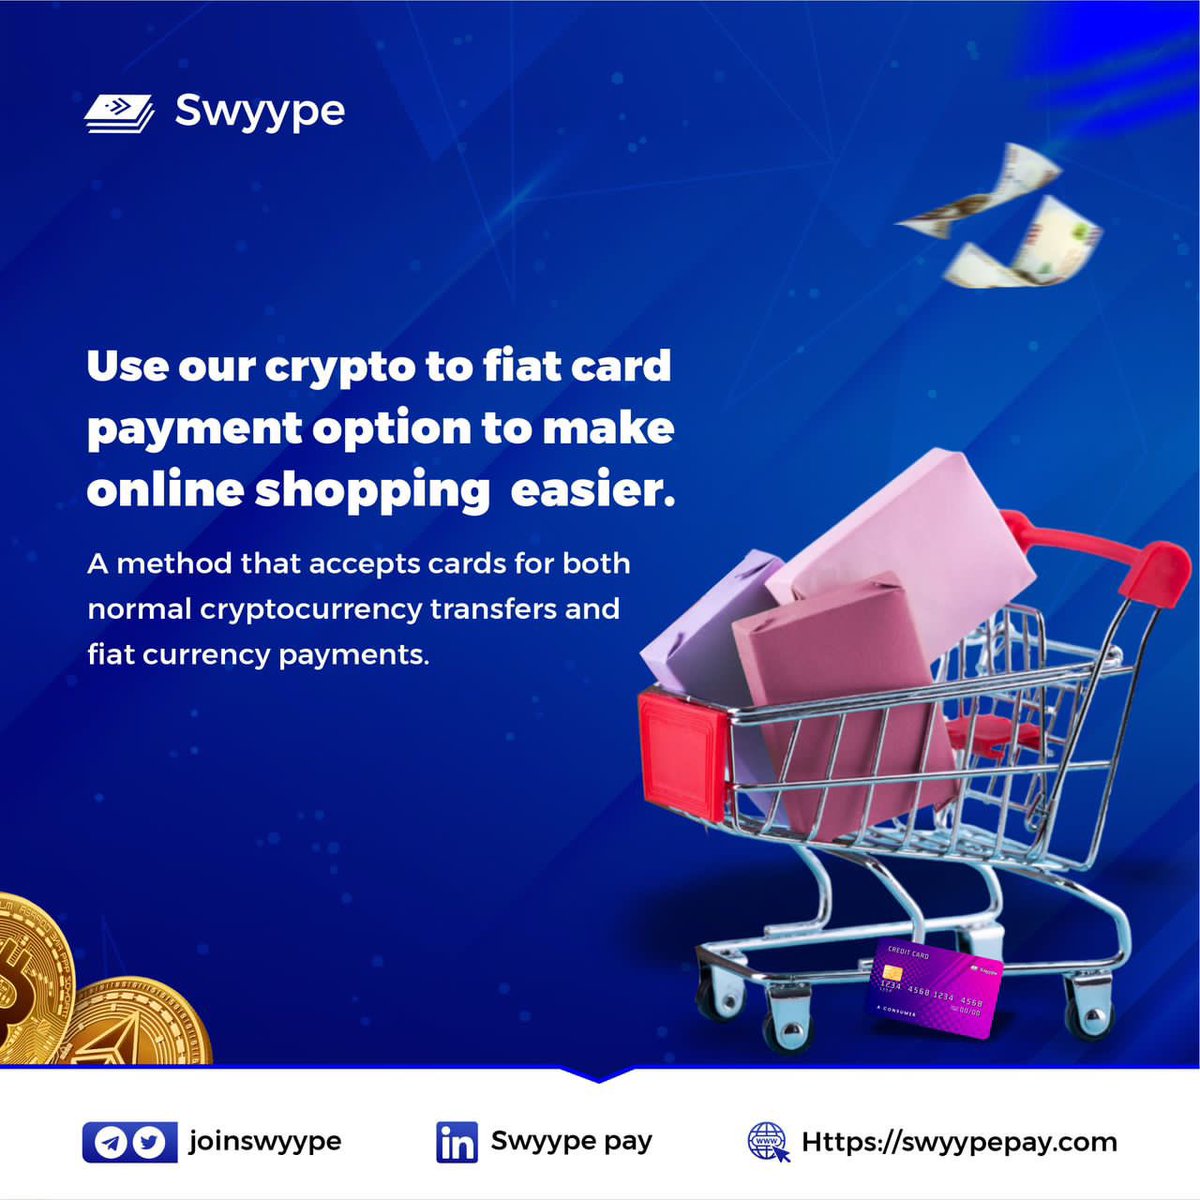 Join the revolution and shop smarter with Swyype today! 

#Swyype #OnlineShopping #CryptoToFiat #VirtualCard #PhysicalCard